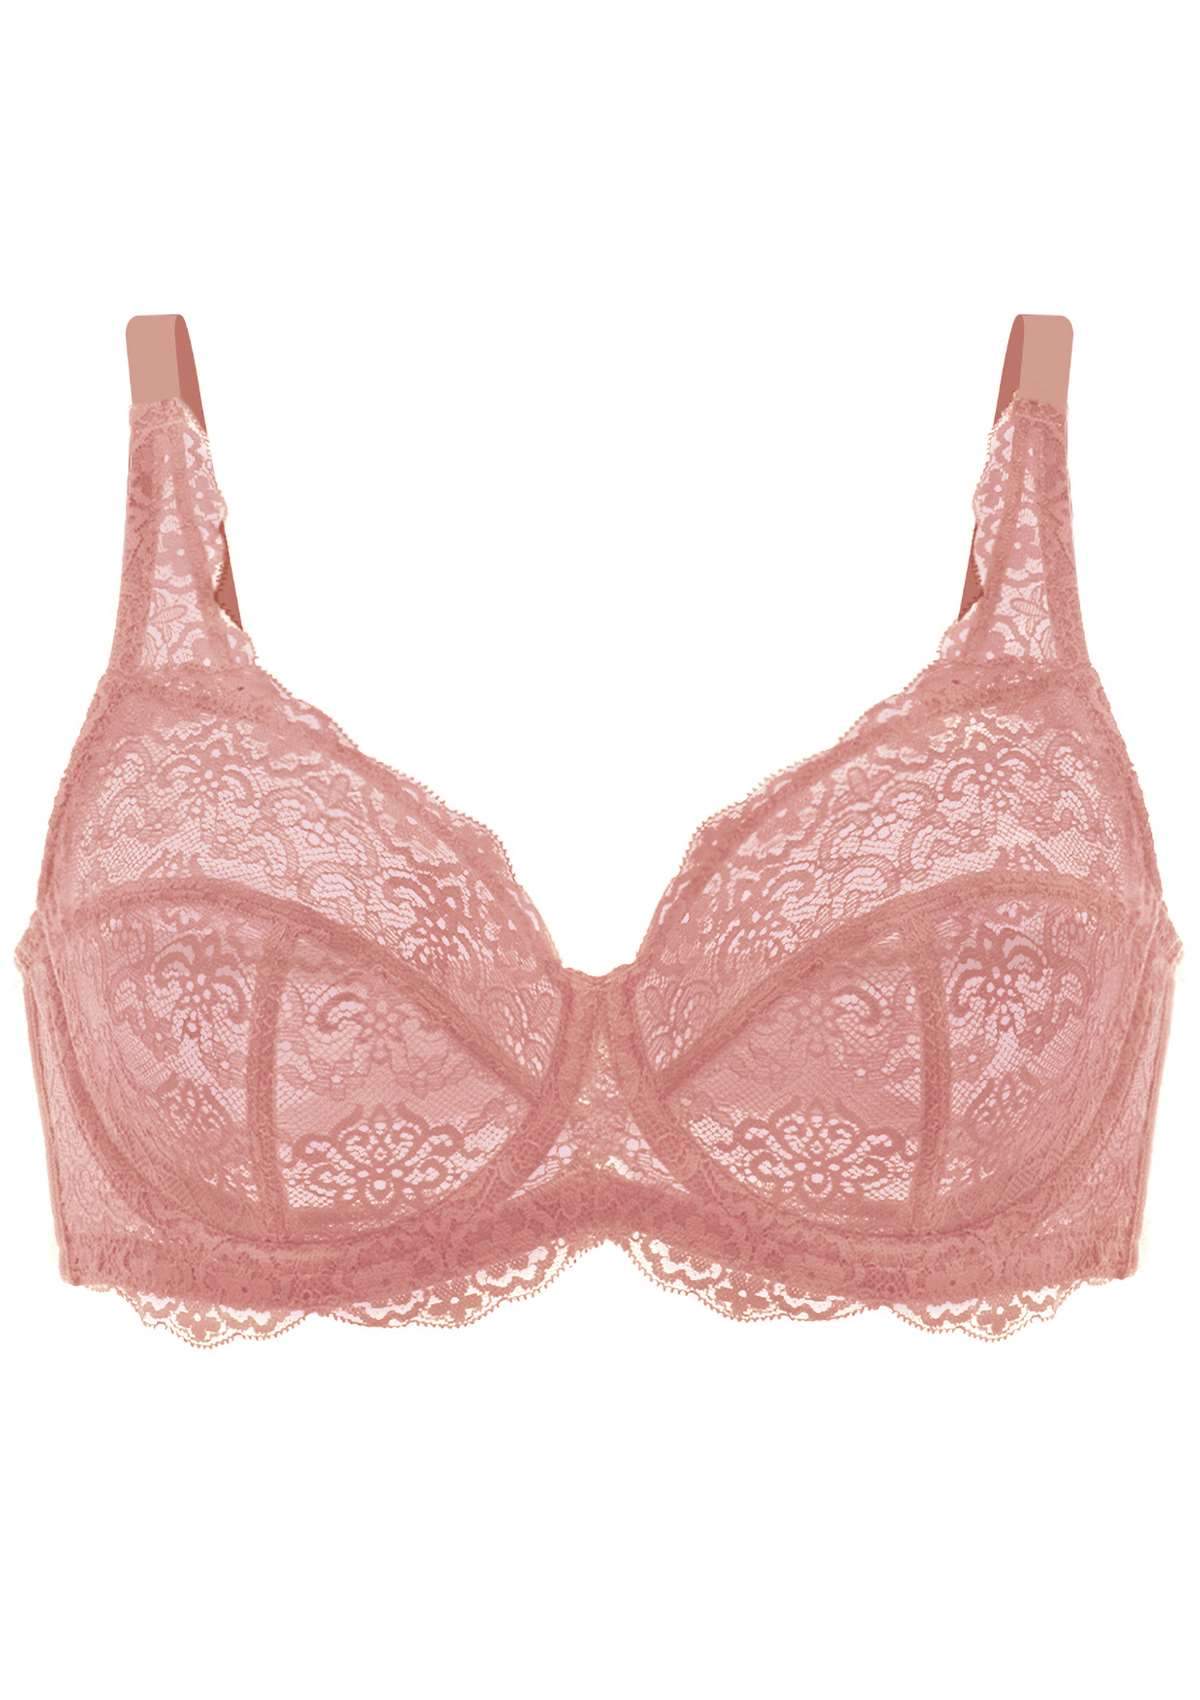 HSIA Forget Me Not Thin Bra: Wide Band Bra For Wide Set Breasts - Dusty Peach / 42 / DDD/F